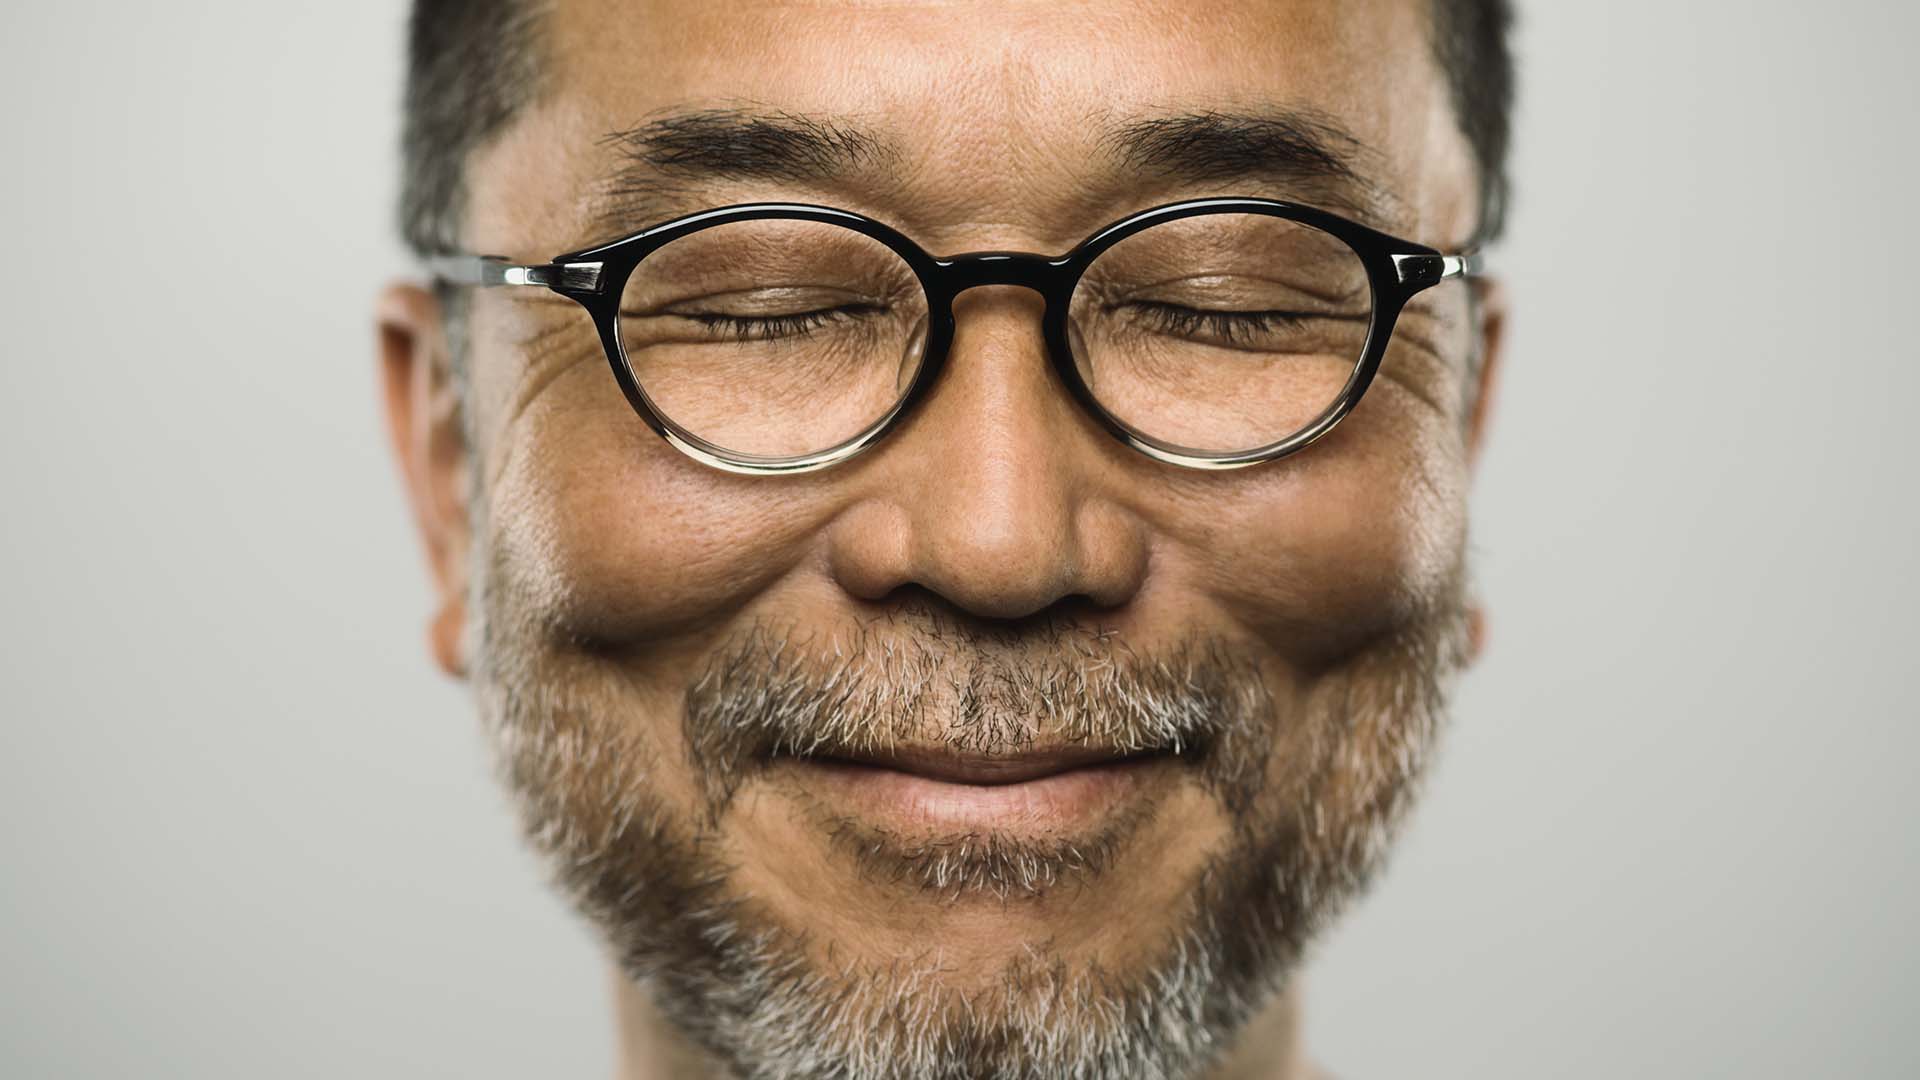 Man with glasses and closed eyes is smiling